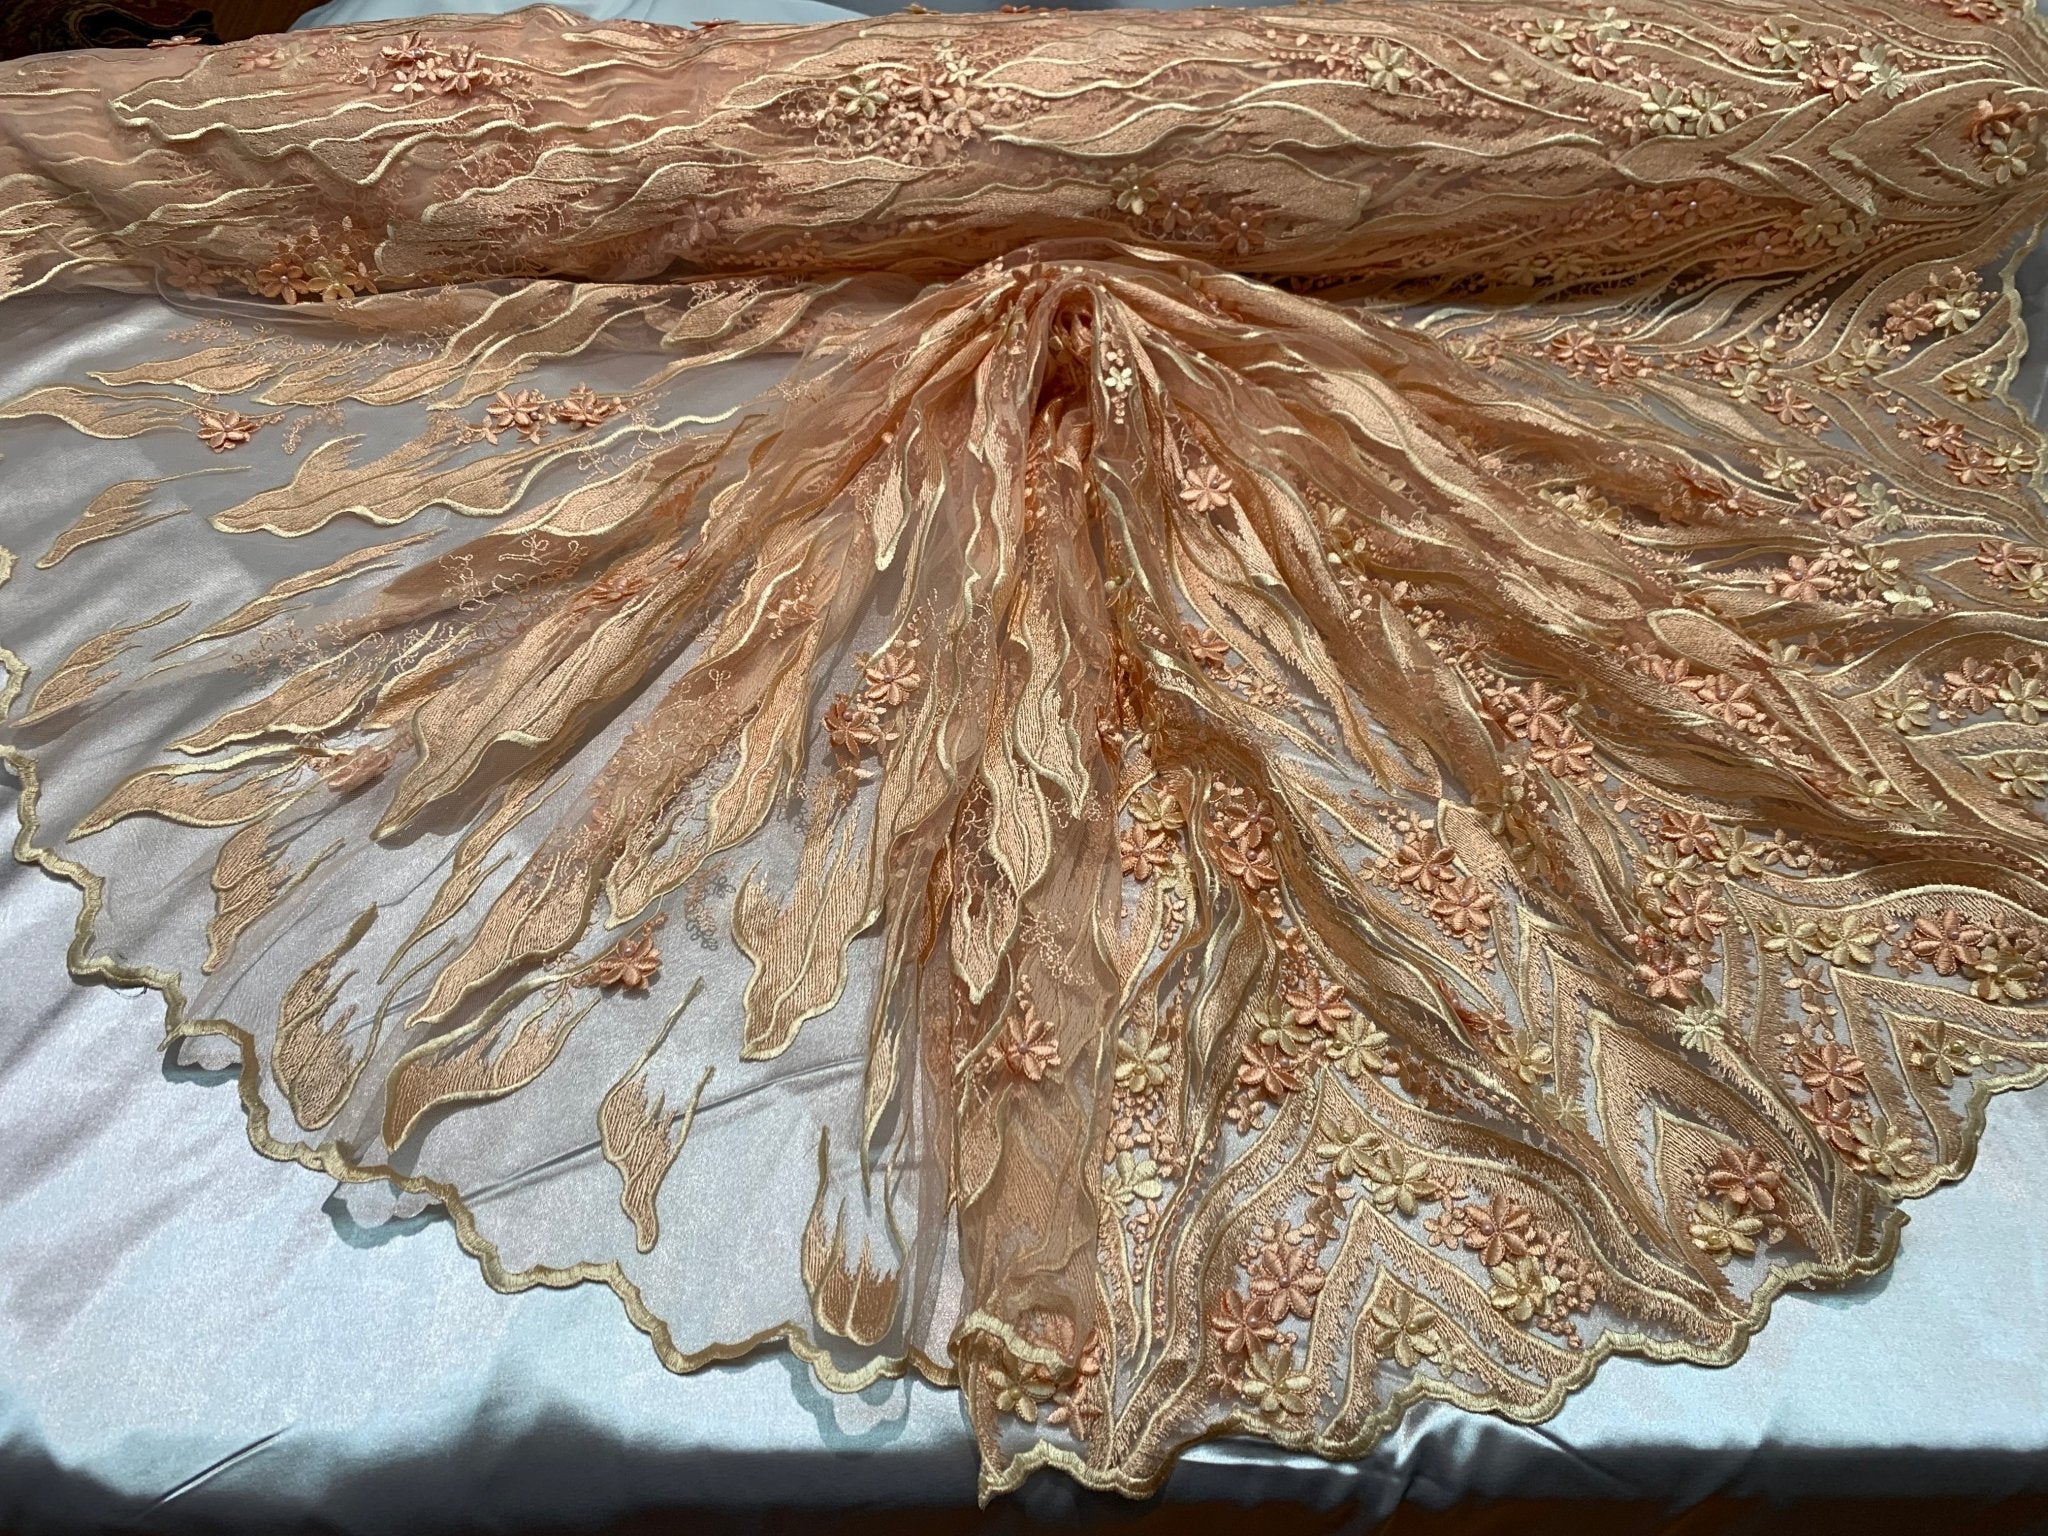 Peach_3D FLOWERS Hand Beaded Mesh Lace Fabric Embroidery Lace Fabric By The Yard/Floral Embroidered Handmade/Gowns/ Dress/ Tablecloths/ICEFABRICICE FABRICSPeach_3D FLOWERS Hand Beaded Mesh Lace Fabric Embroidery Lace Fabric By The Yard/Floral Embroidered Handmade/Gowns/ Dress/ Tablecloths/ ICEFABRIC